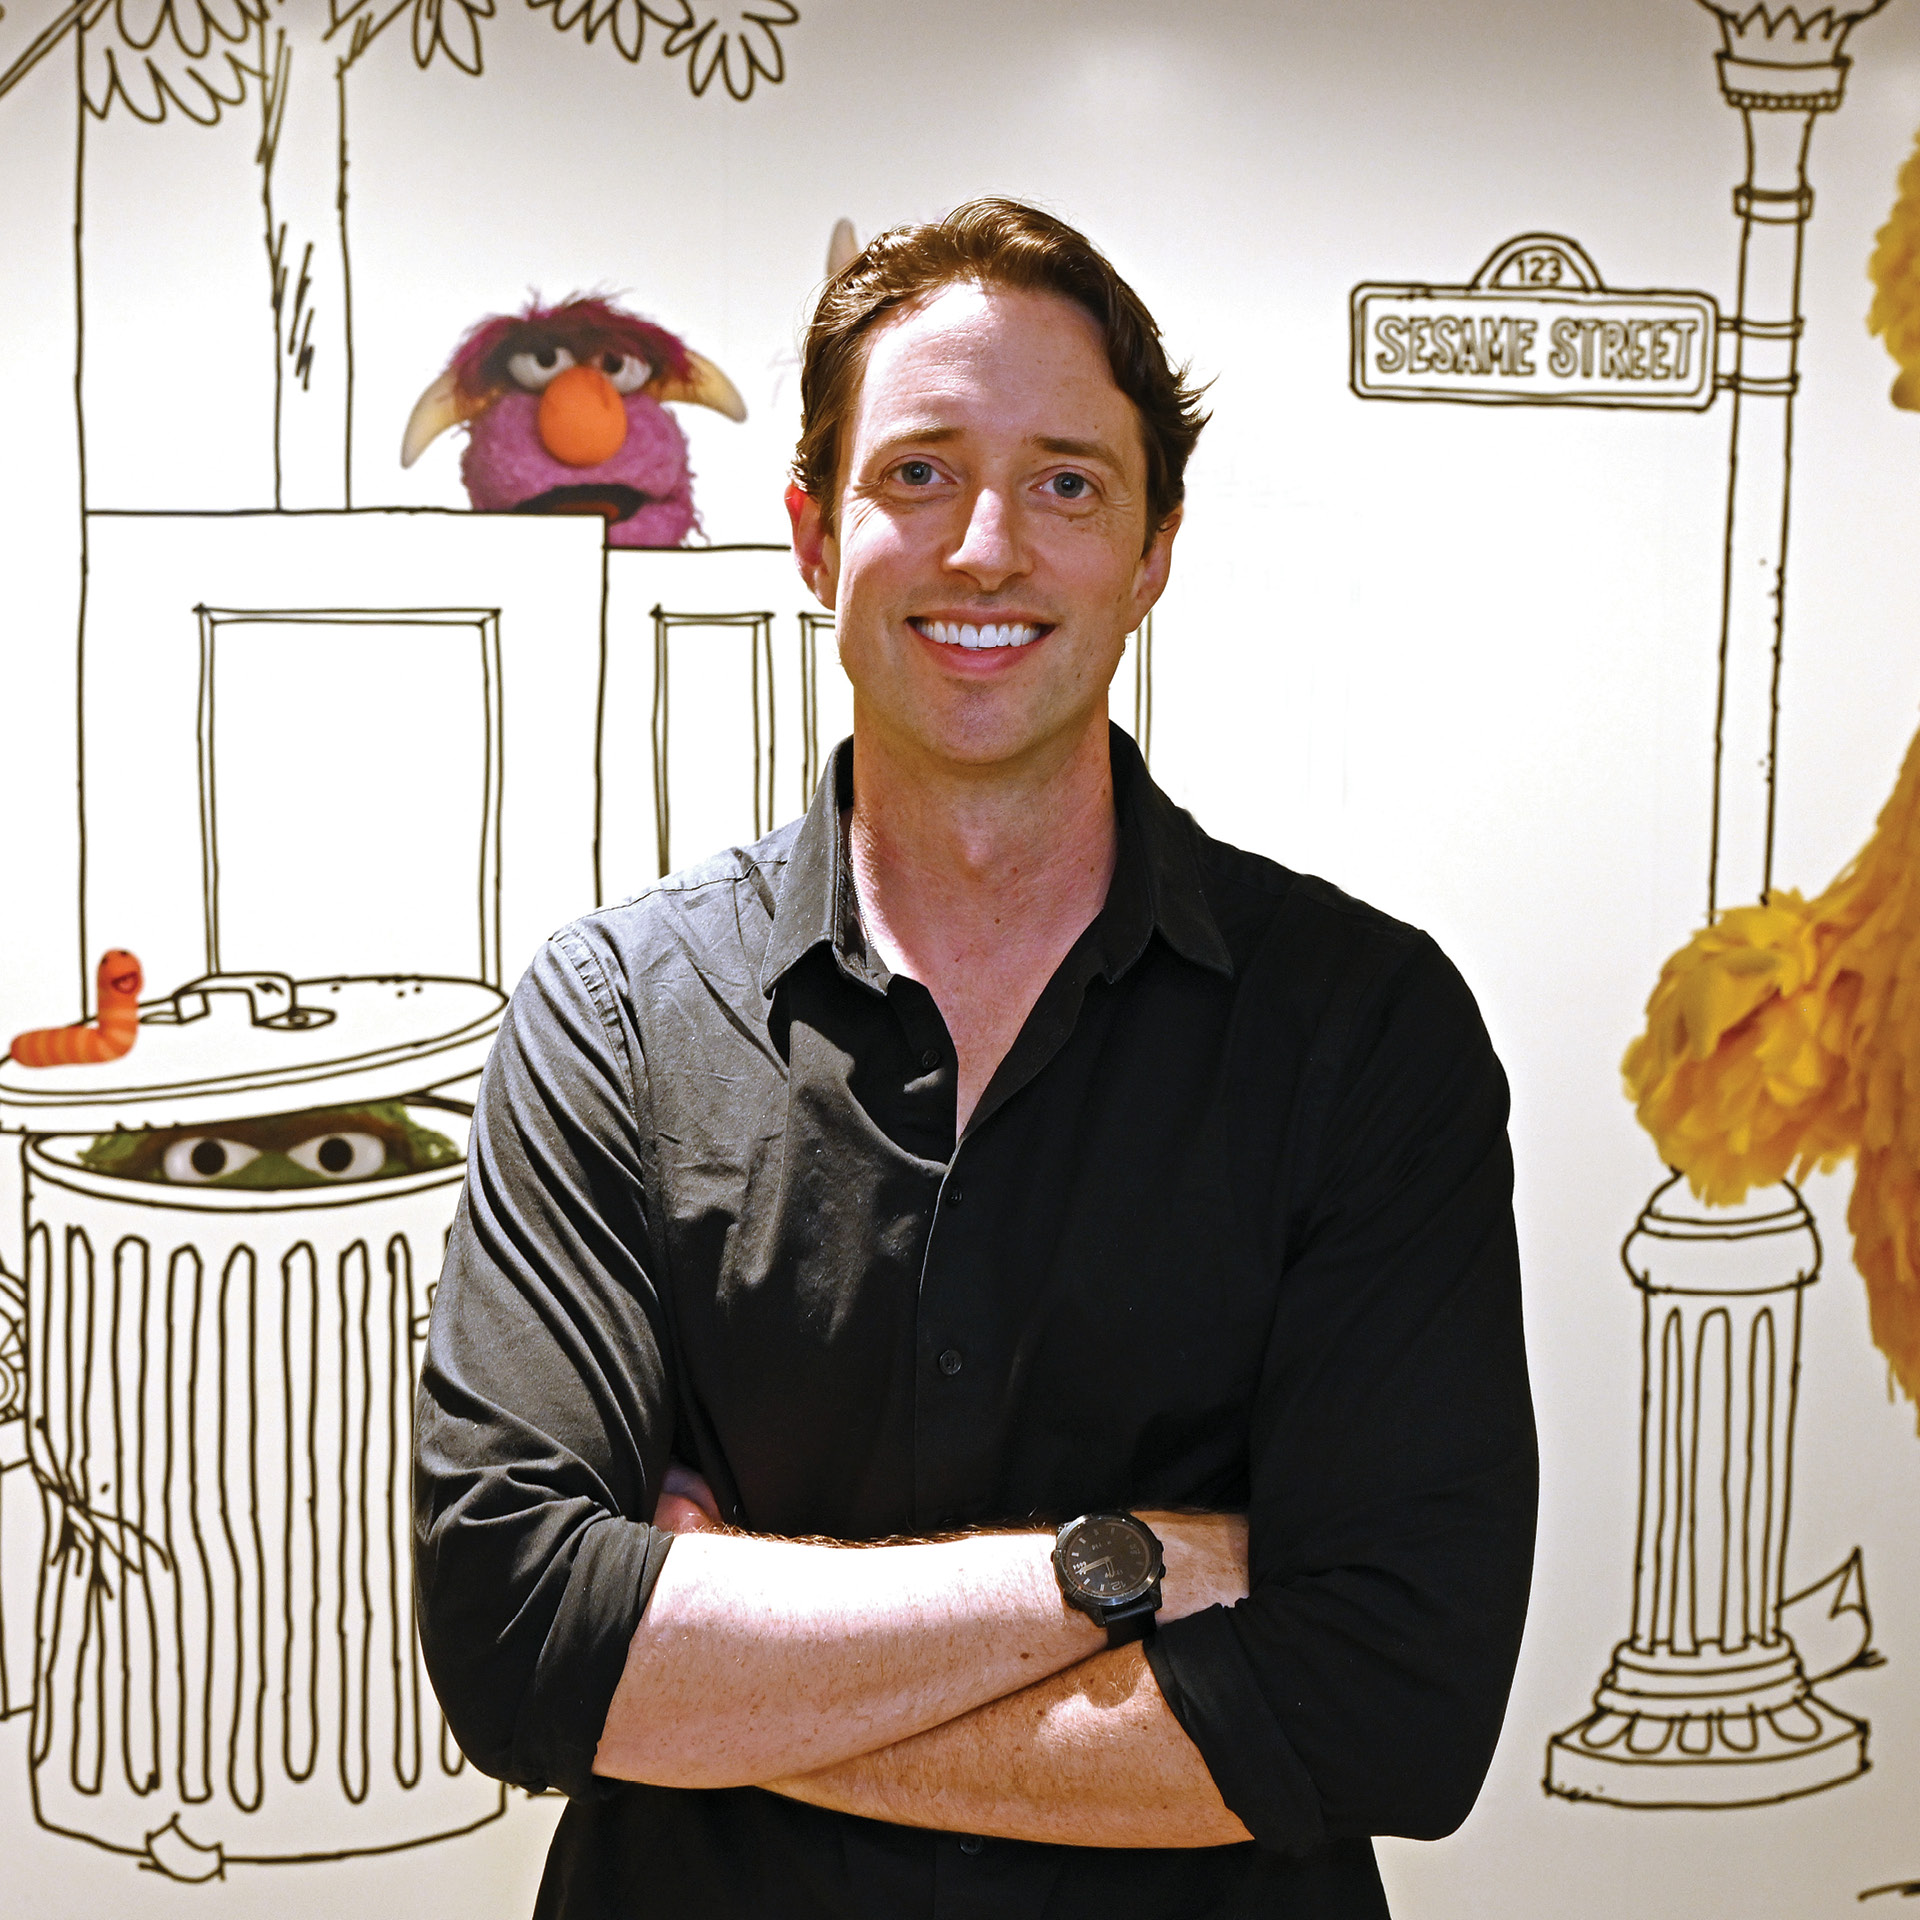 Image of TV producer Jordan Geary '04 in front of a large Sesame Street mural